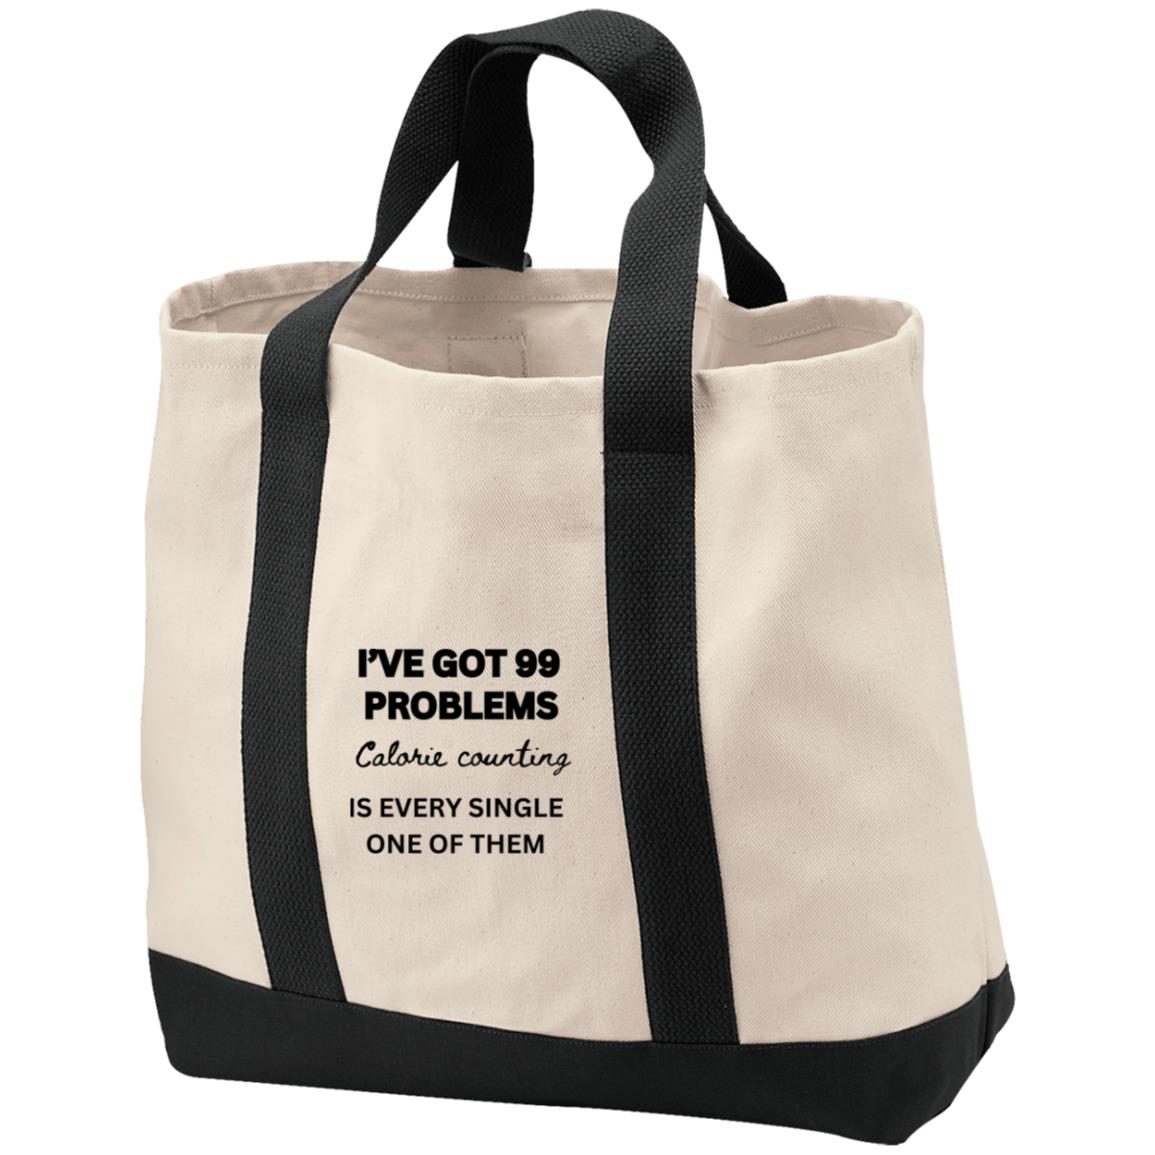 CALORIE COUNTING WOES Shopping Tote Bag